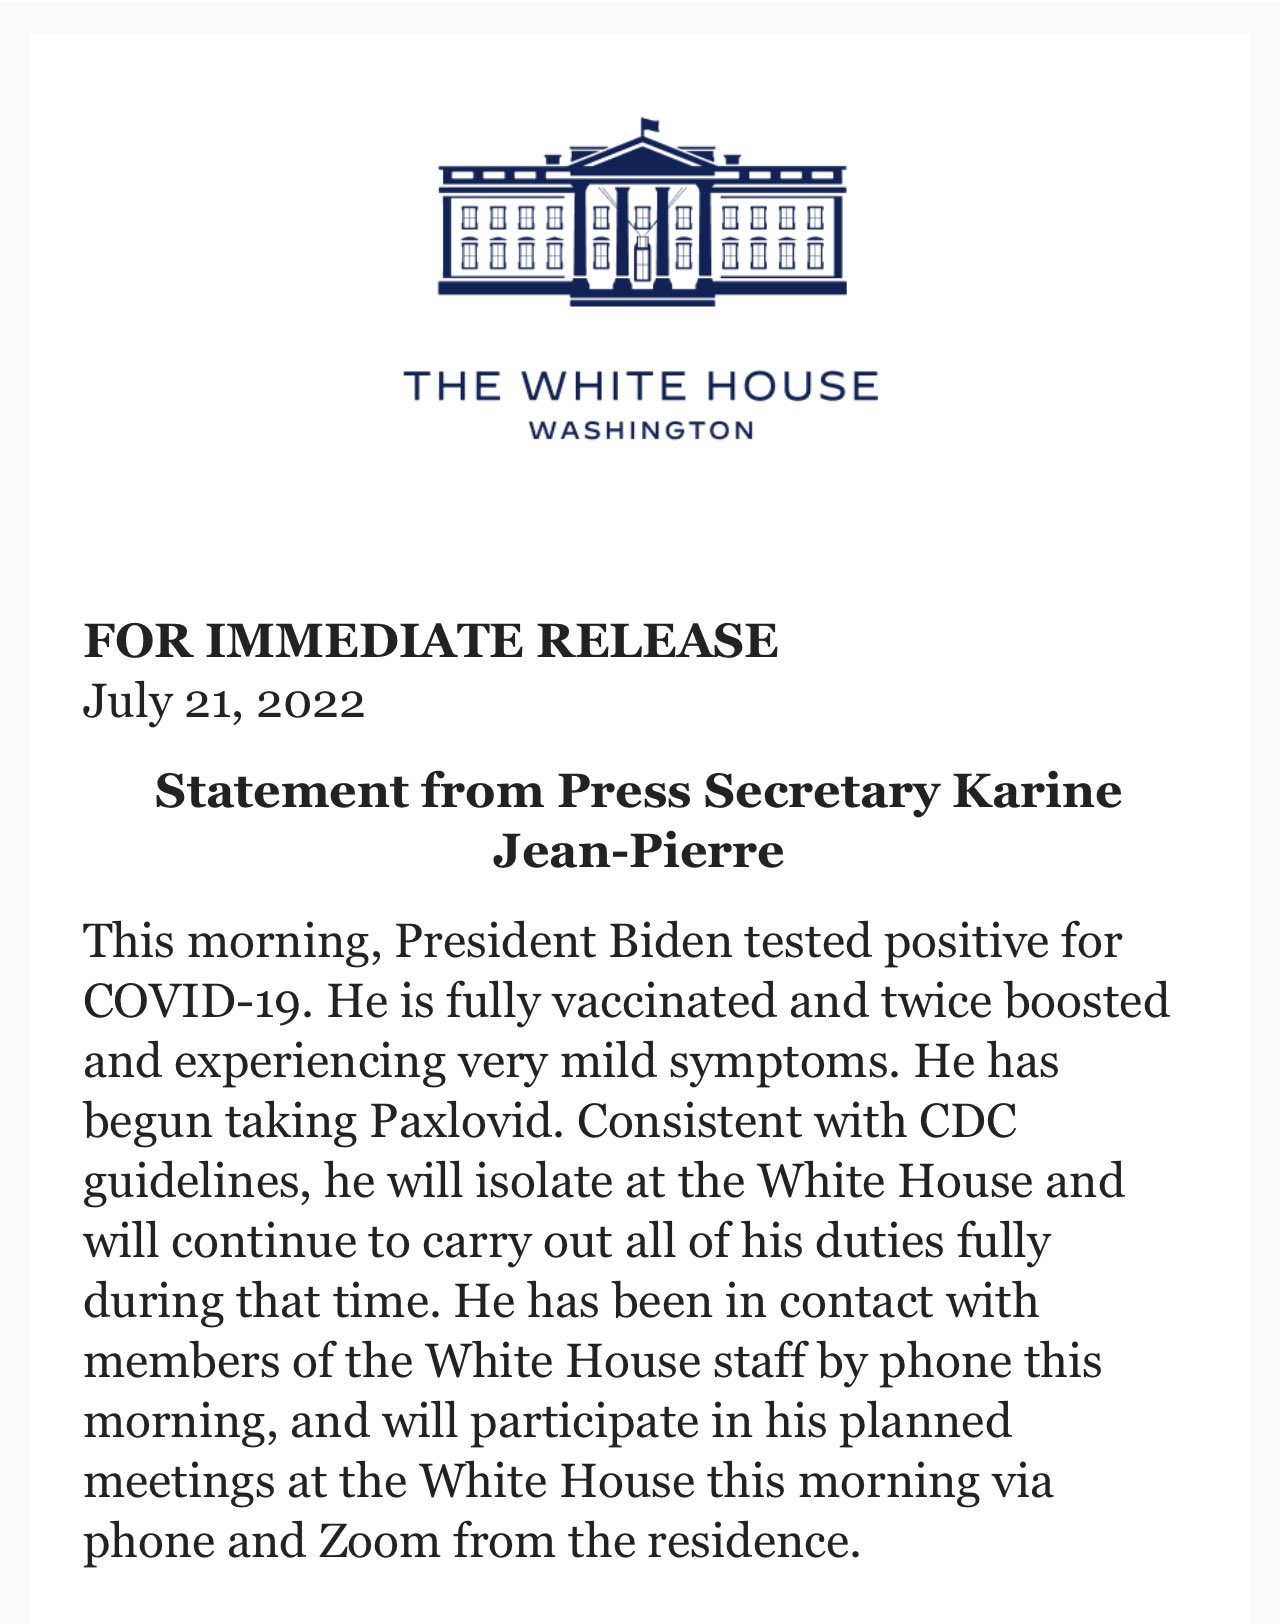 A statement was issued by the White House on Thursday.